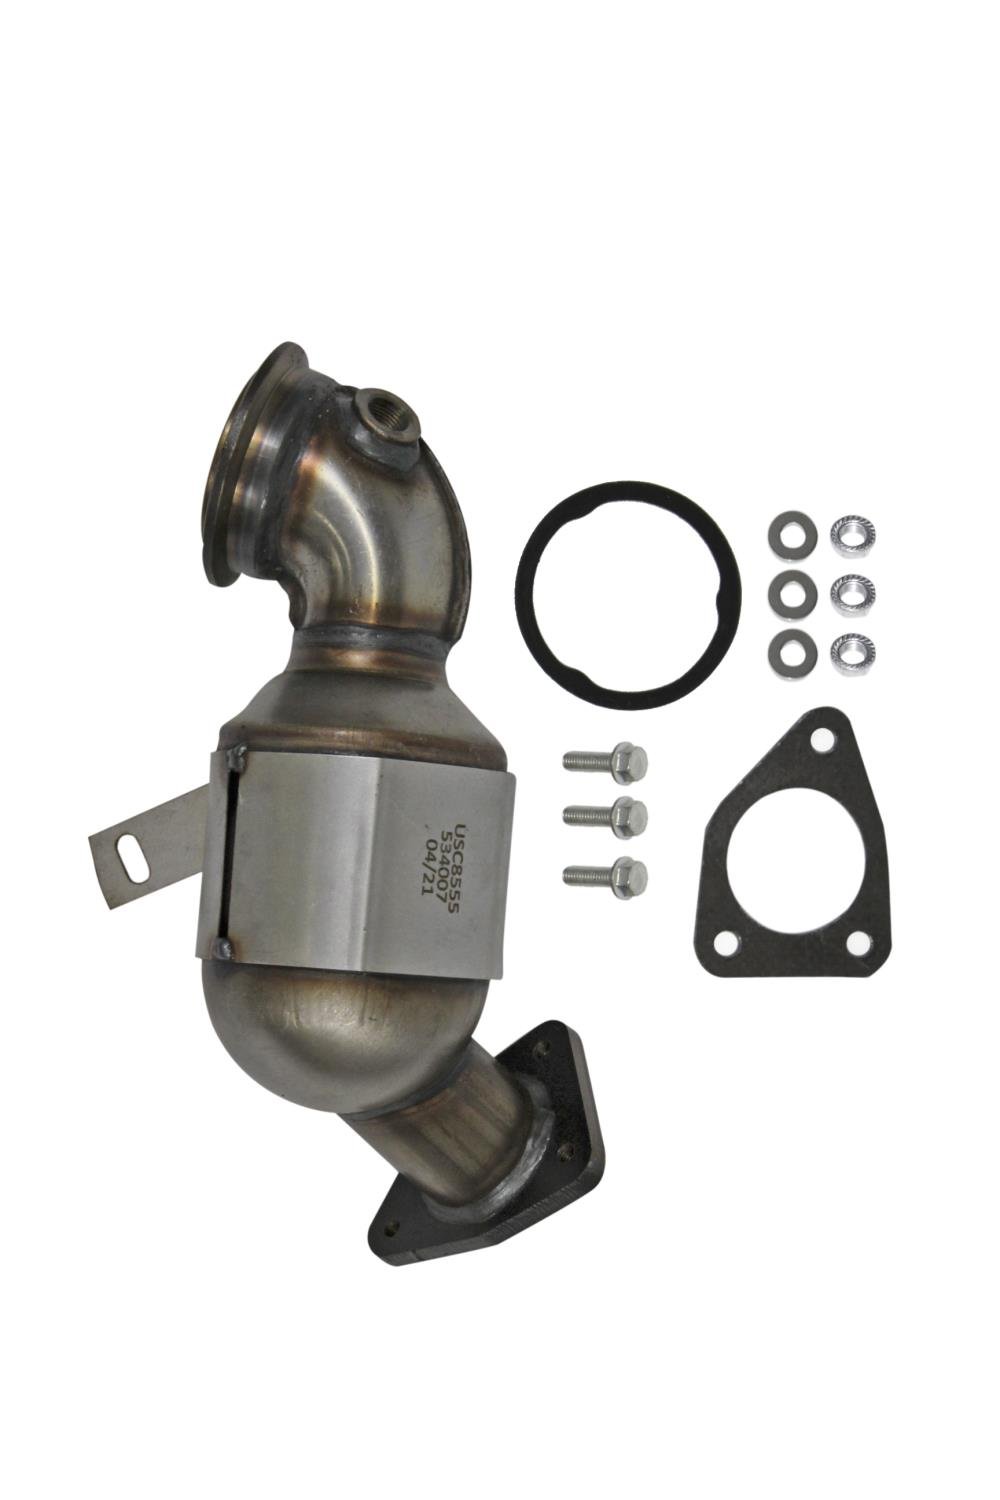 Catalytic Converter Fits 2013-2018 Buick Encore, Select 2011-2018 Chevy Cruze, Sonic, Trax w/1.4L 4 cyl. Eng. [Front]